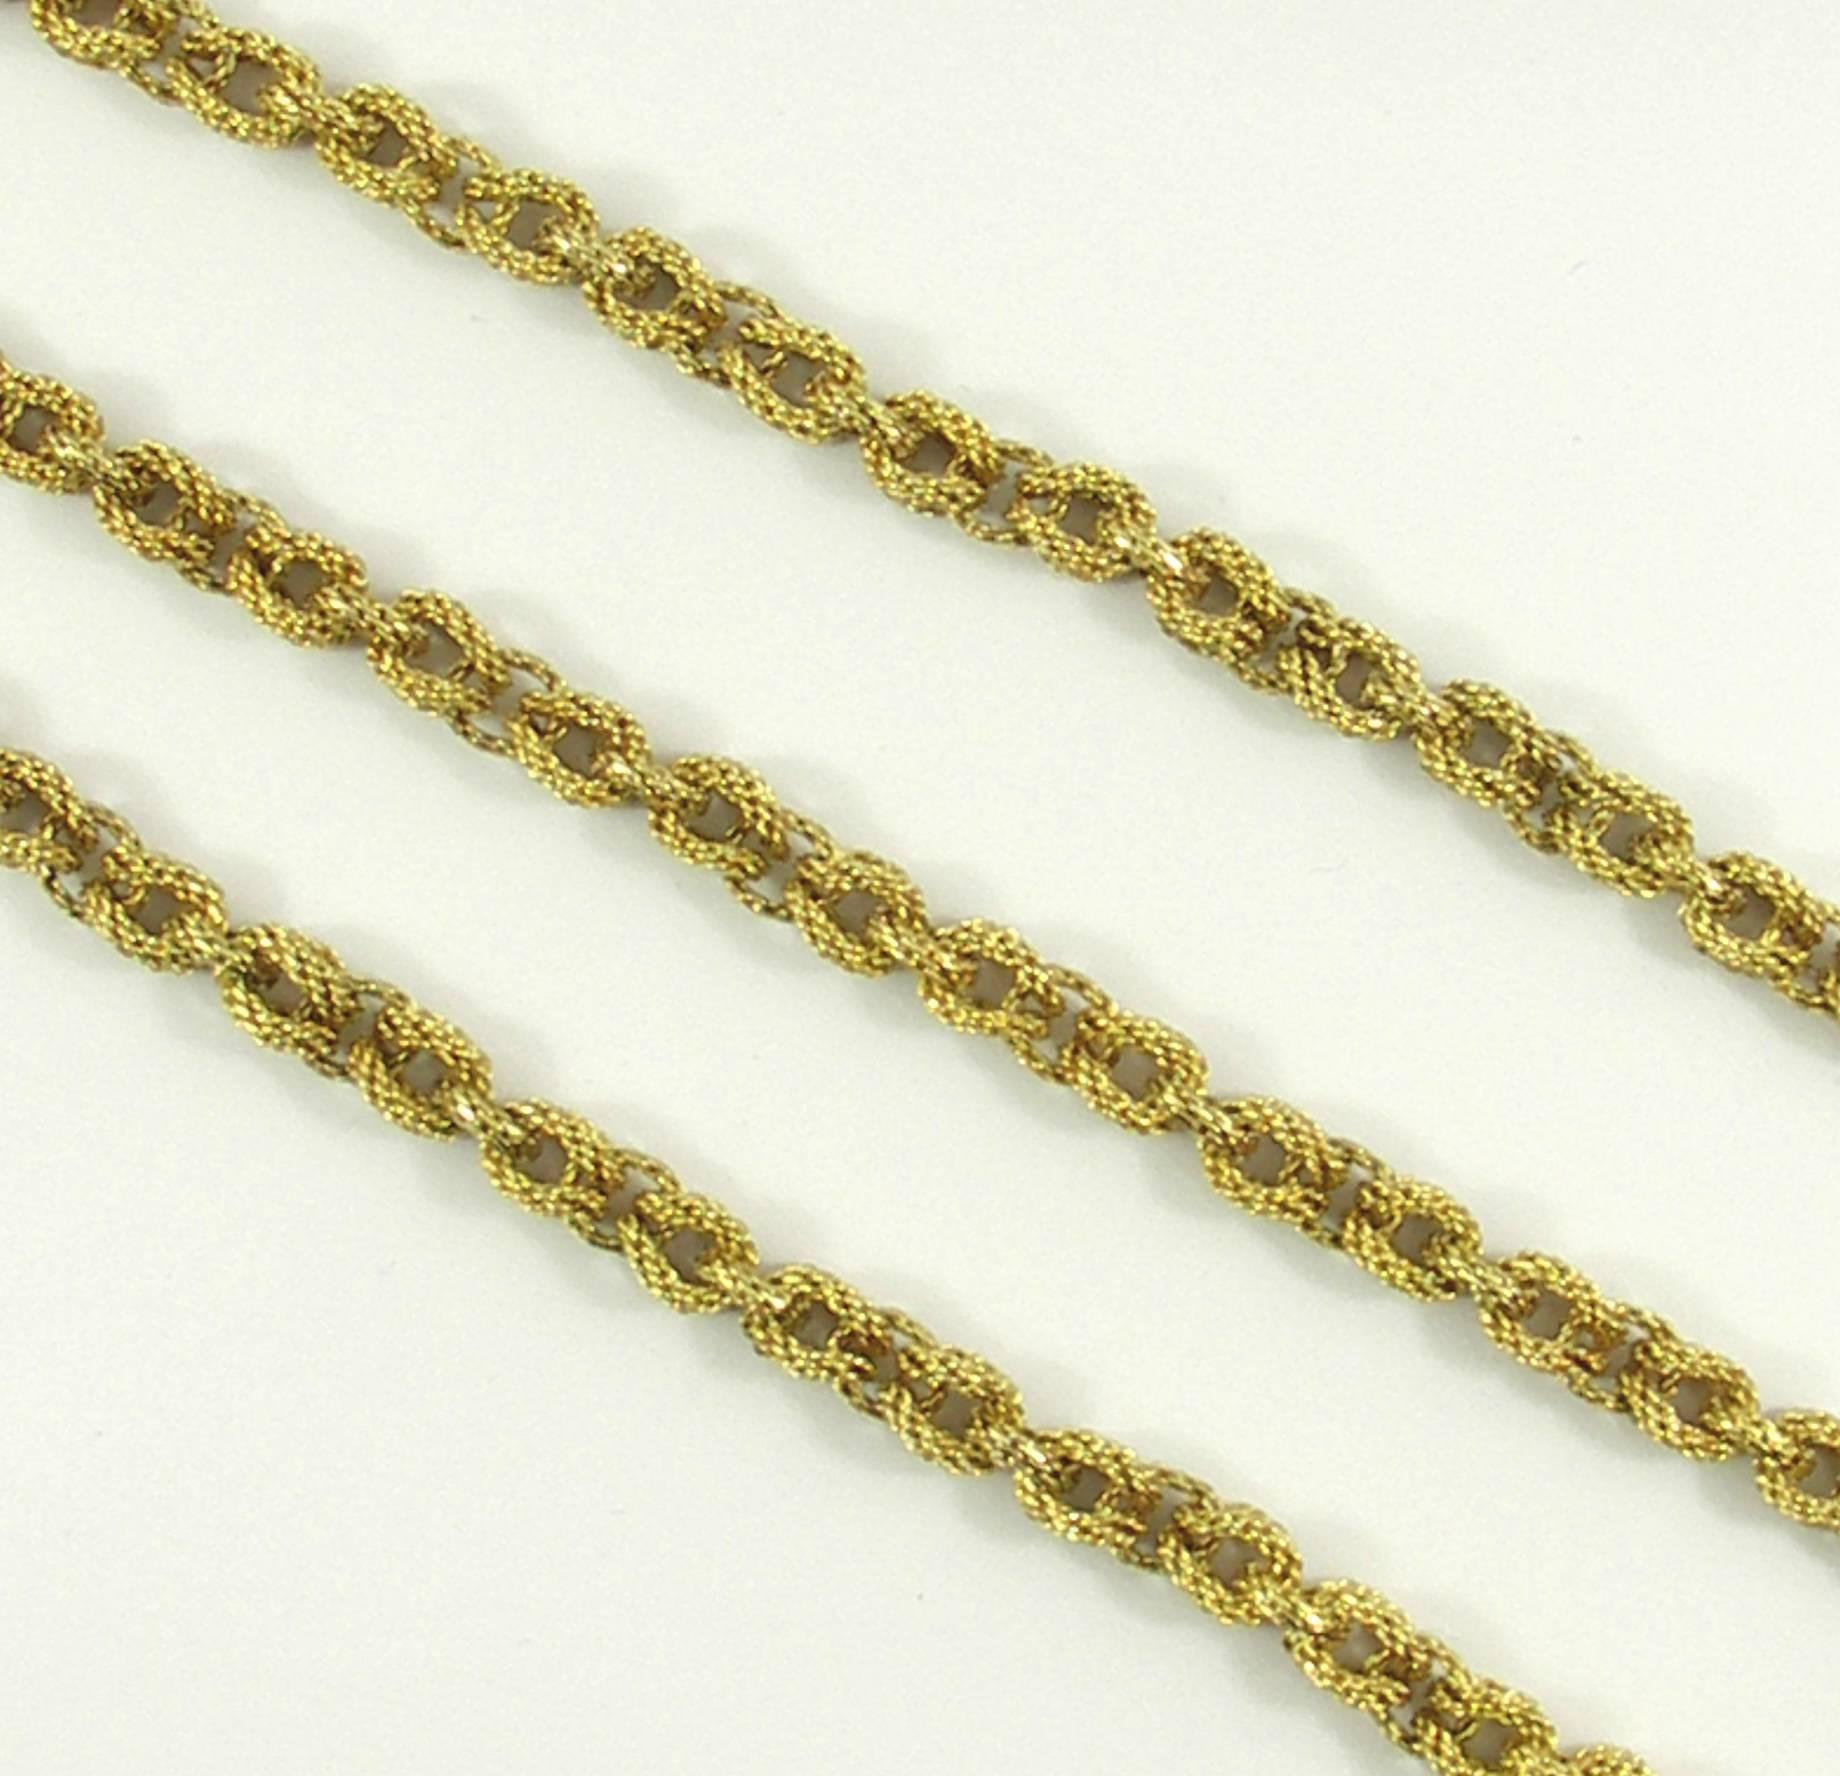 An 18K yellow gold necklace measuring 36 inches long, comprised of alternating lark's head loops, and connectors. Measuring 1/4 inch wide the three dimensional links, combined with the texture create a rich look. Signed Tiffany & Co., the overall